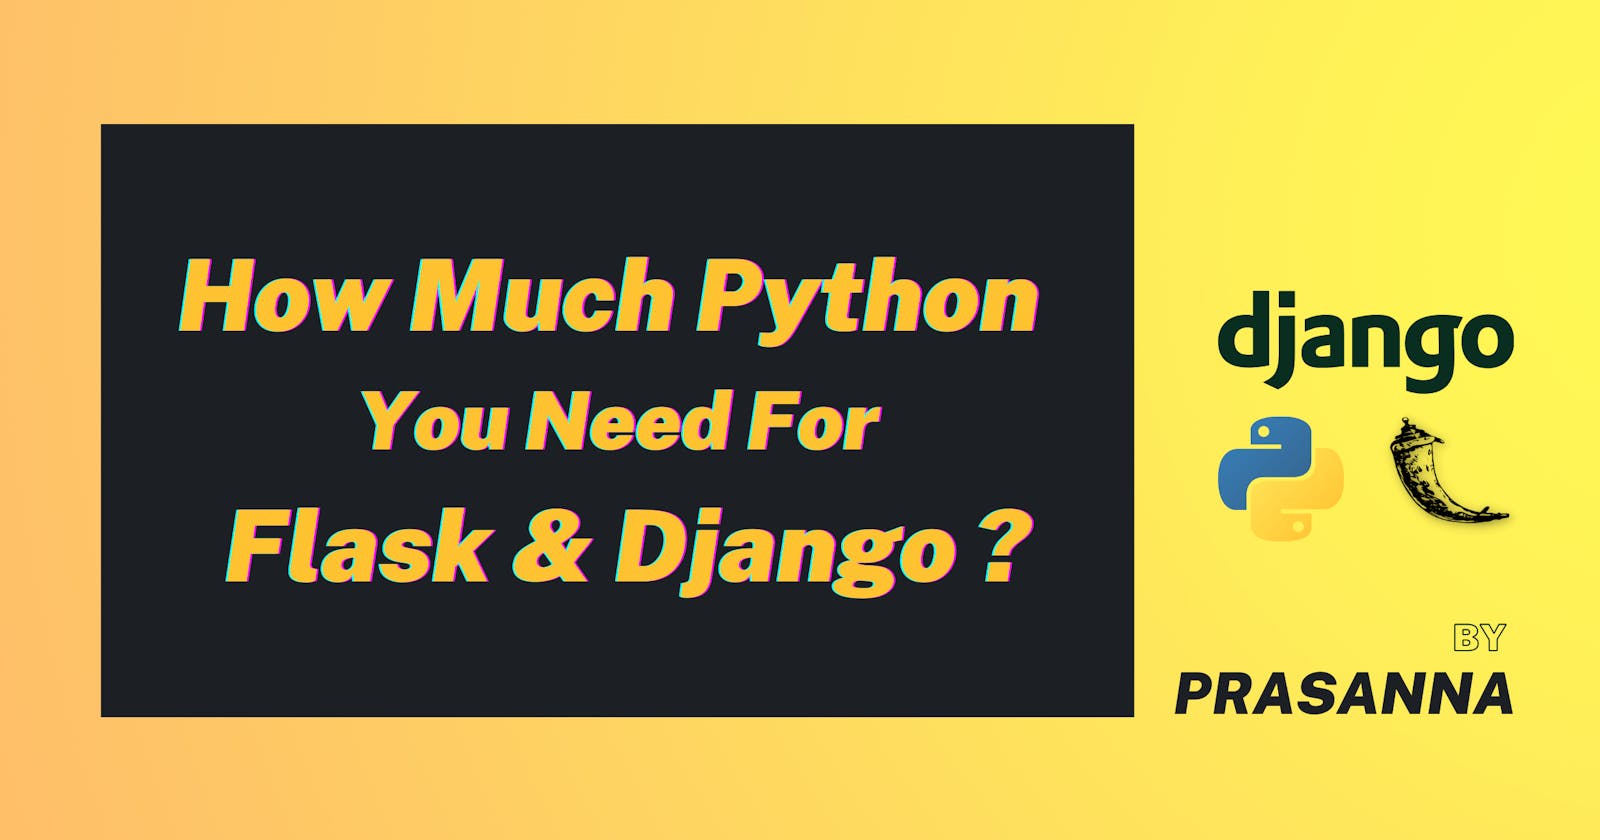 How much Python you need to know to get started with Flask & Django.